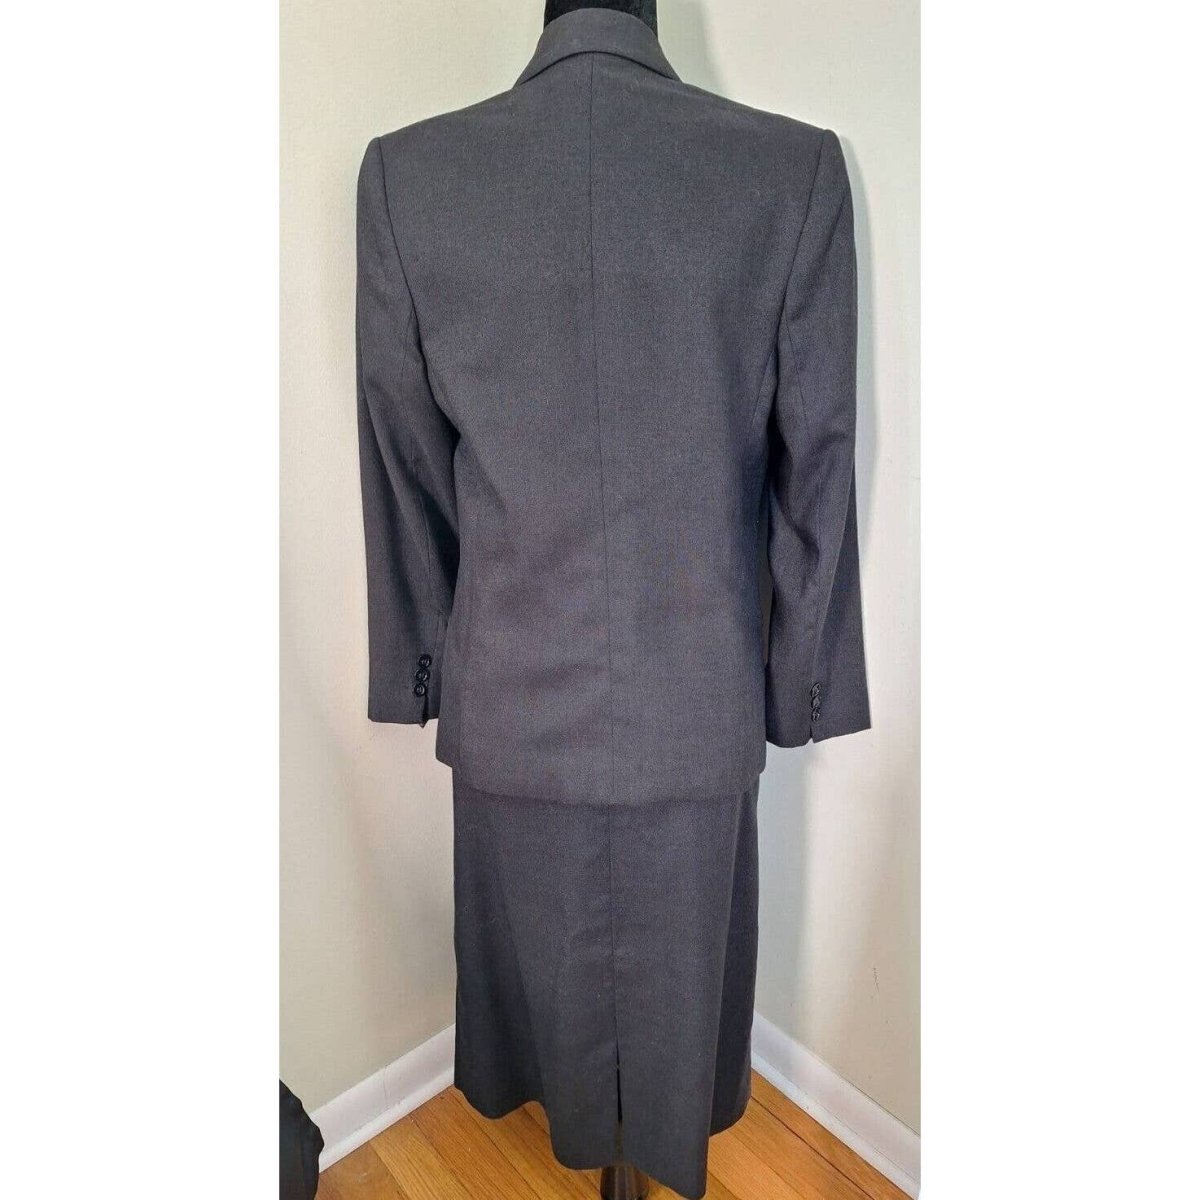 Vintage 80s Black Double Breasted Midi Skirt Suit Linen Blend Women's Size Small 4 - themallvintage The Mall Vintage